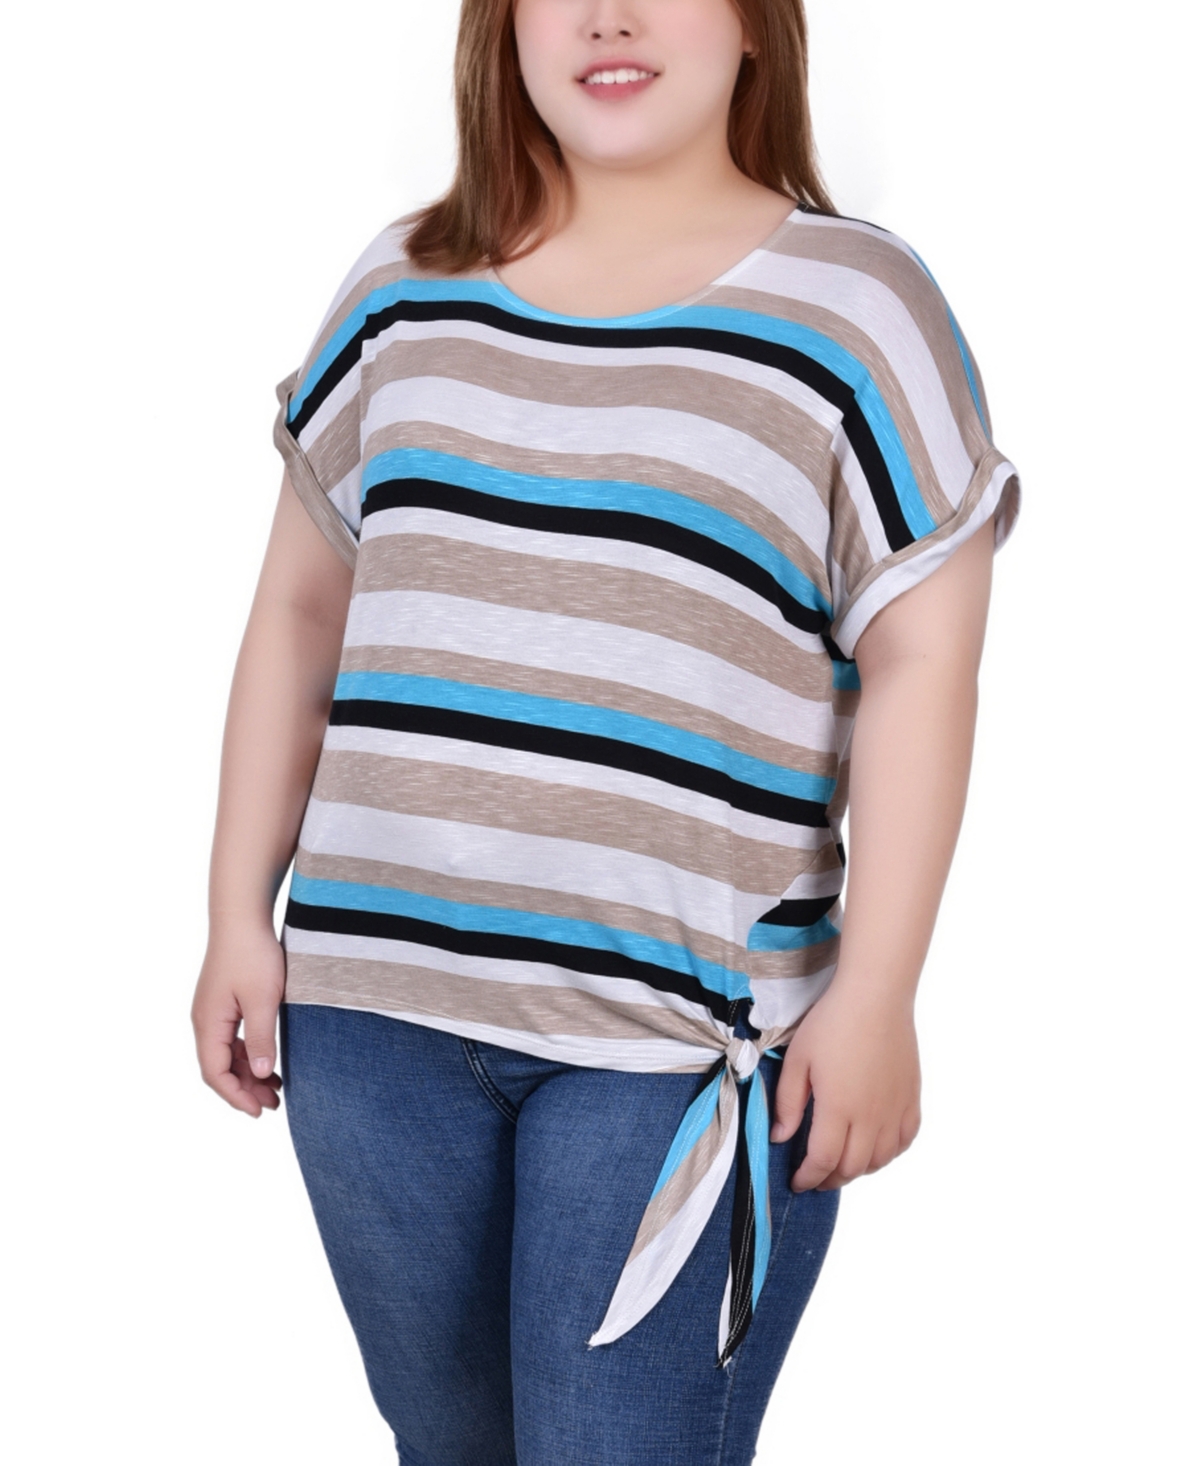 Plus Size Short Sleeve Tie Front Top - Turquoise Multi Stripe